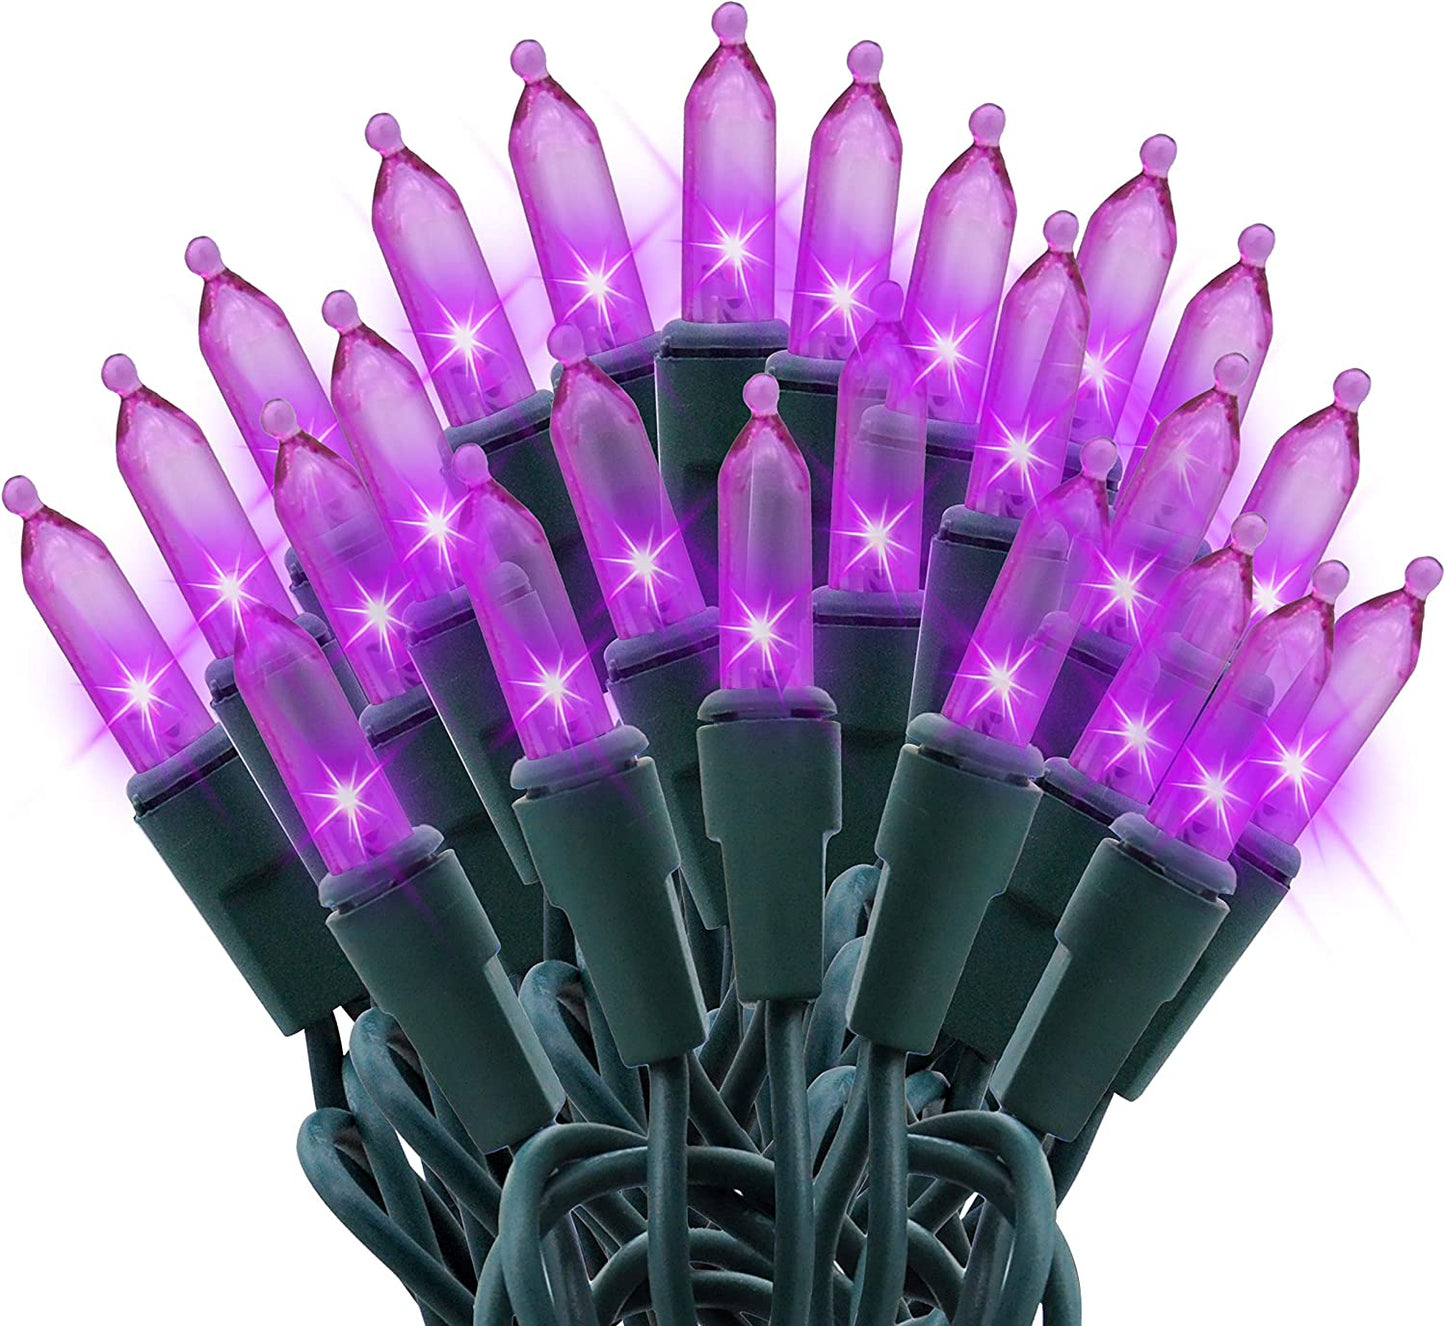 100-count Purple LED Green Wire Lights